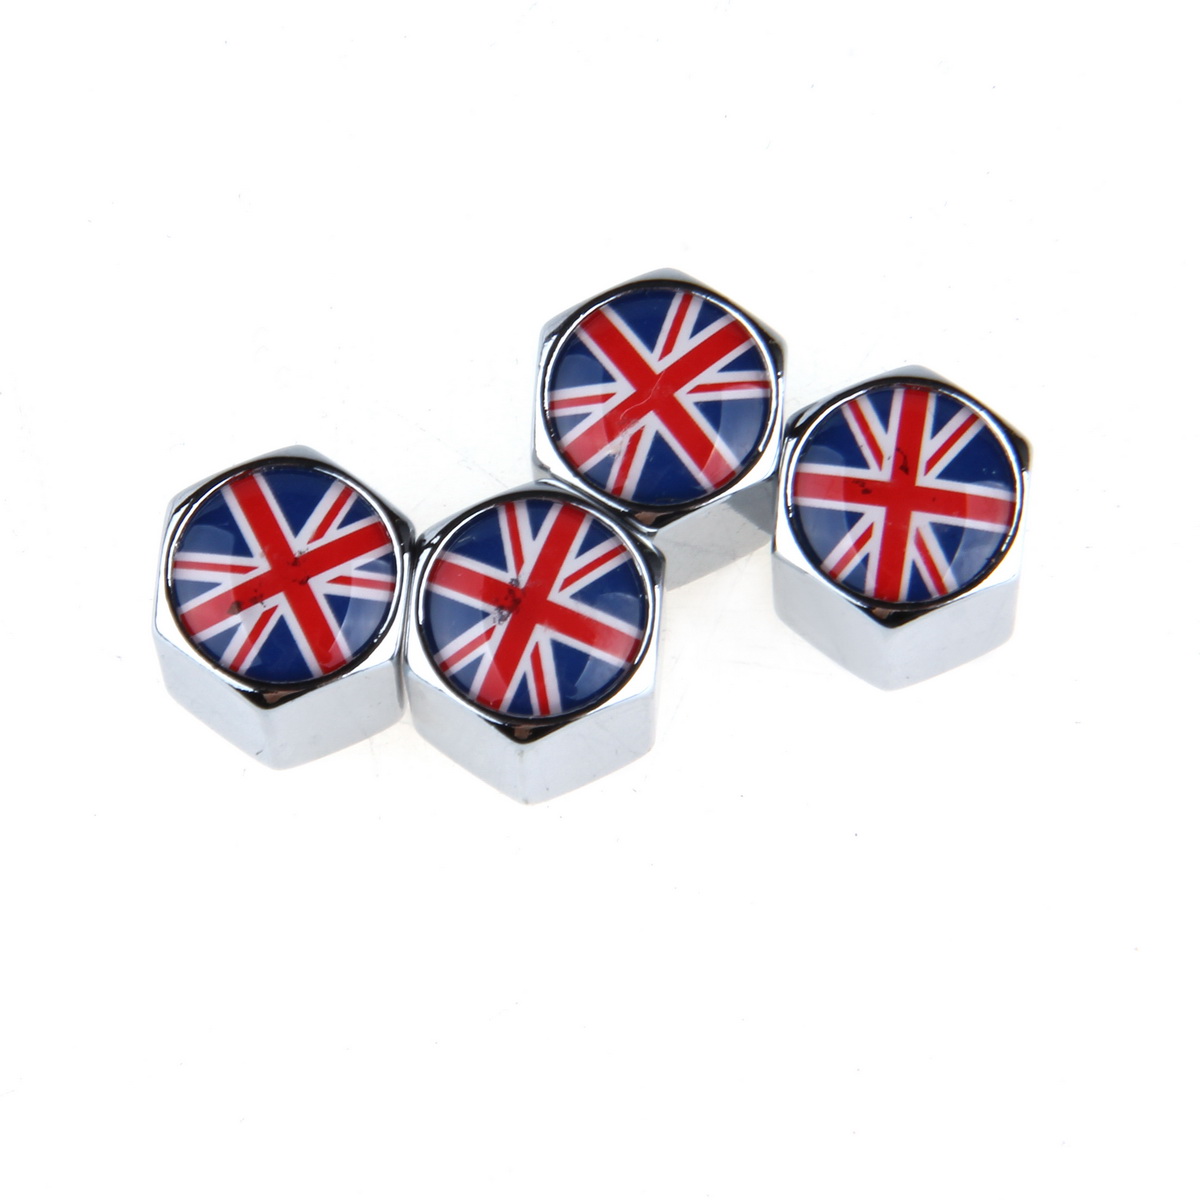 Universal 8mm Car Wheel Tyre Tire Air Valve Caps UK United Kingdom Flag for Ford